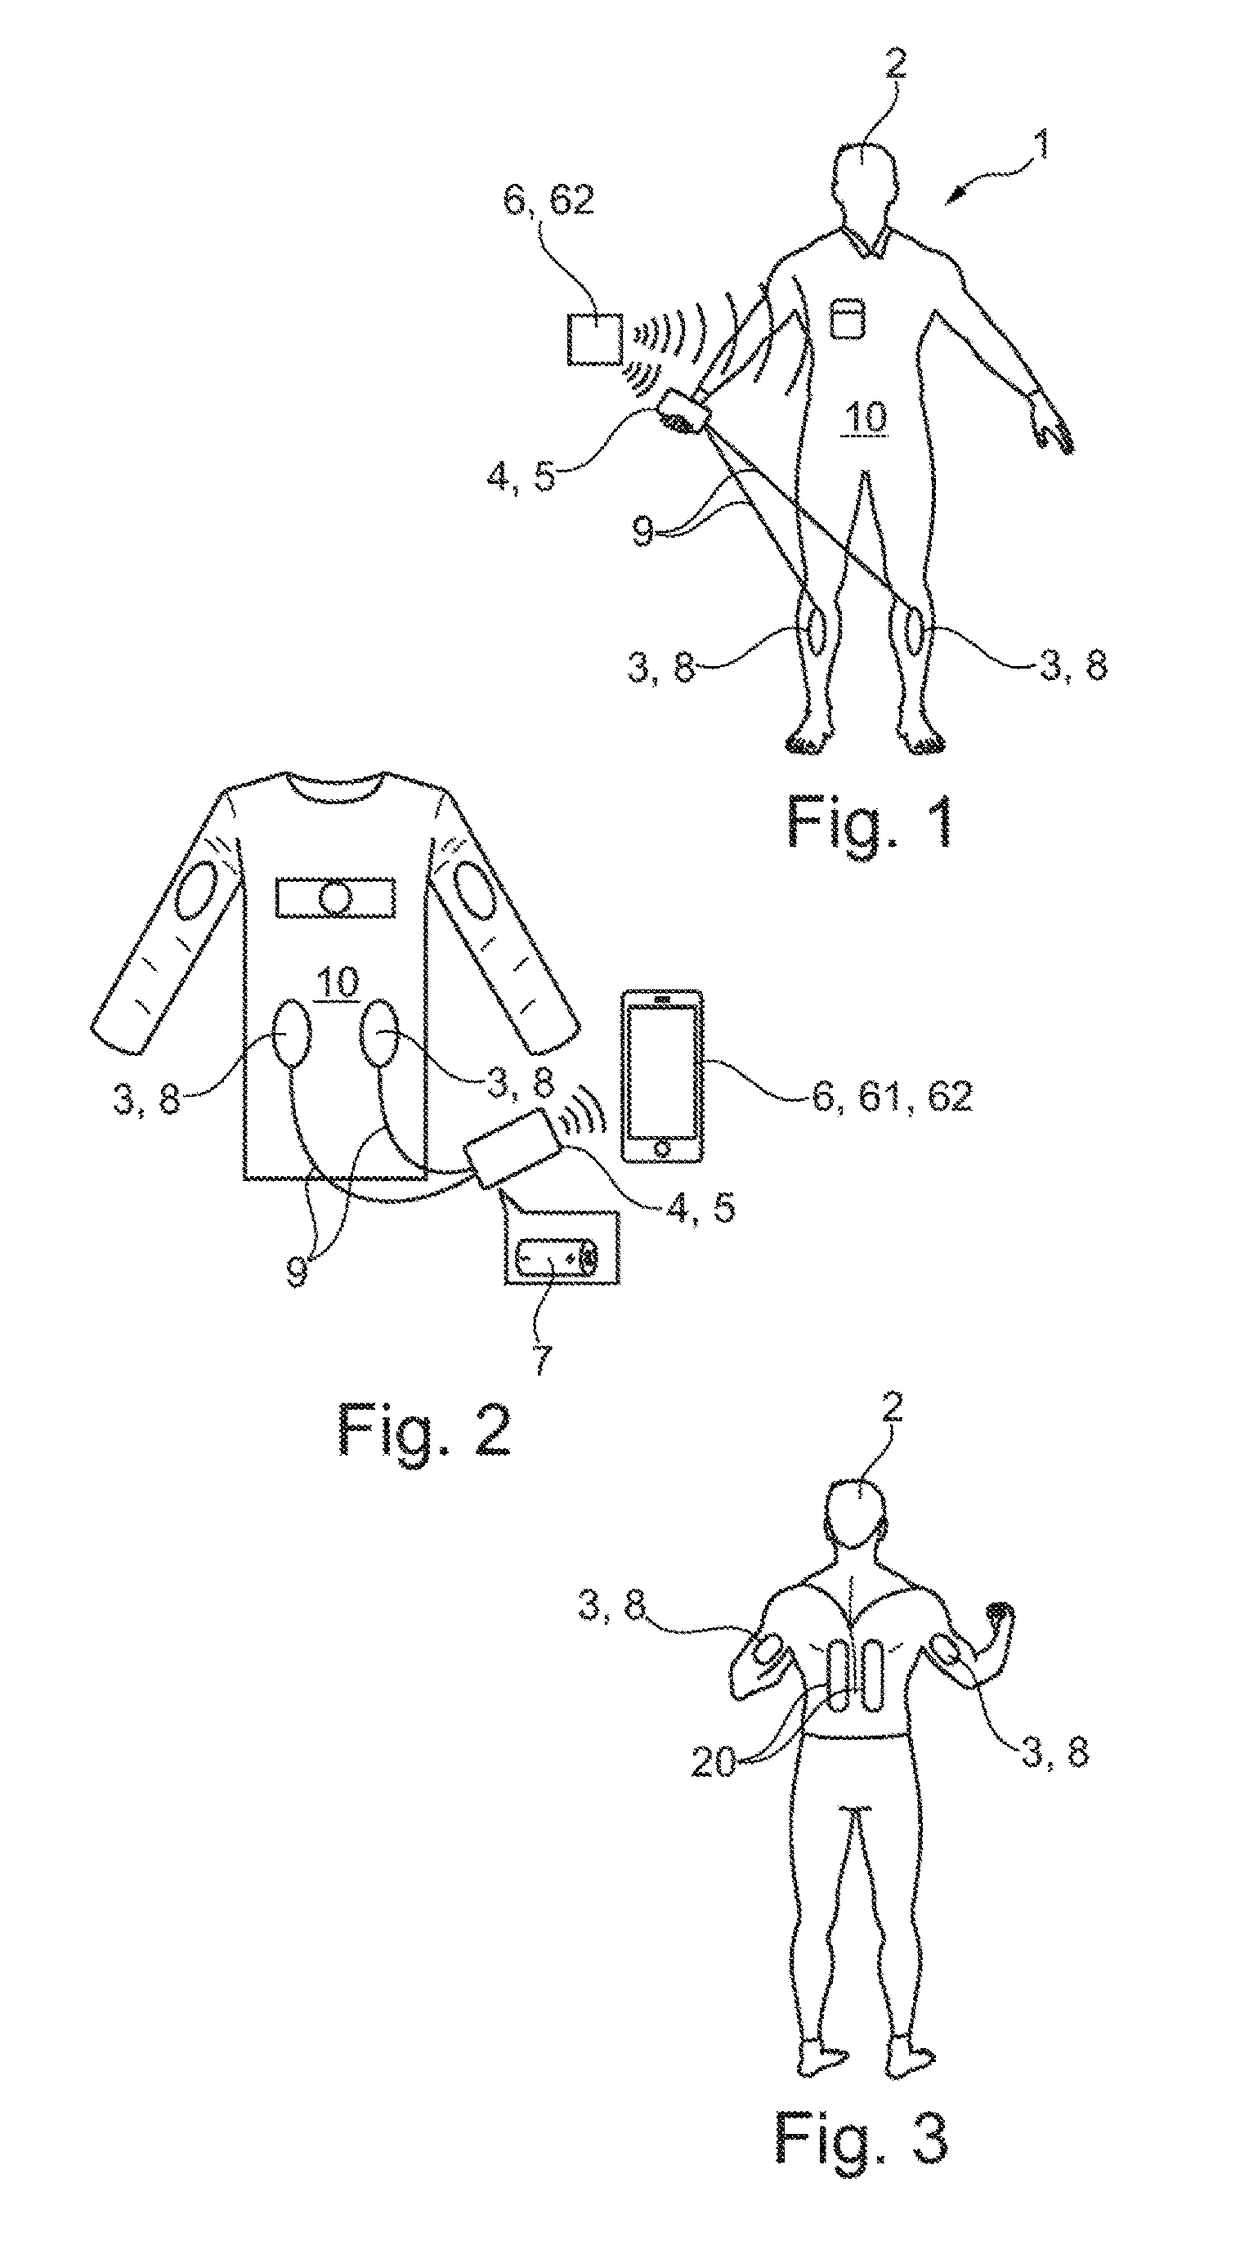 System for controlling stimulation impulses